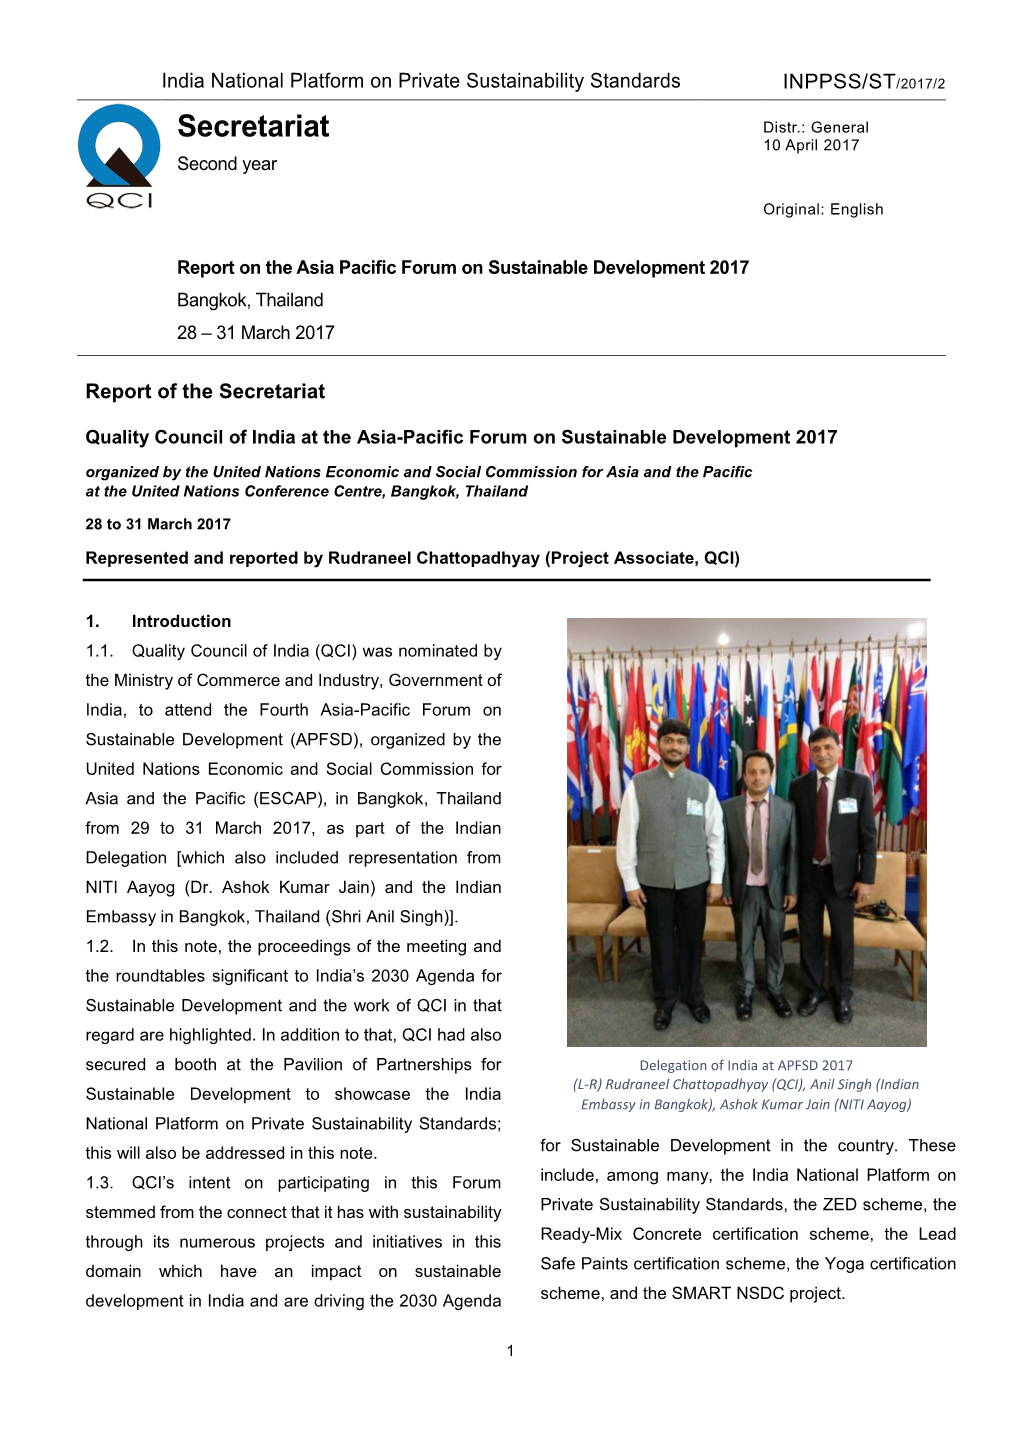 Report on the Asia Pacific Forum on Sustainable Development 2017 Bangkok, Thailand 28 – 31 March 2017